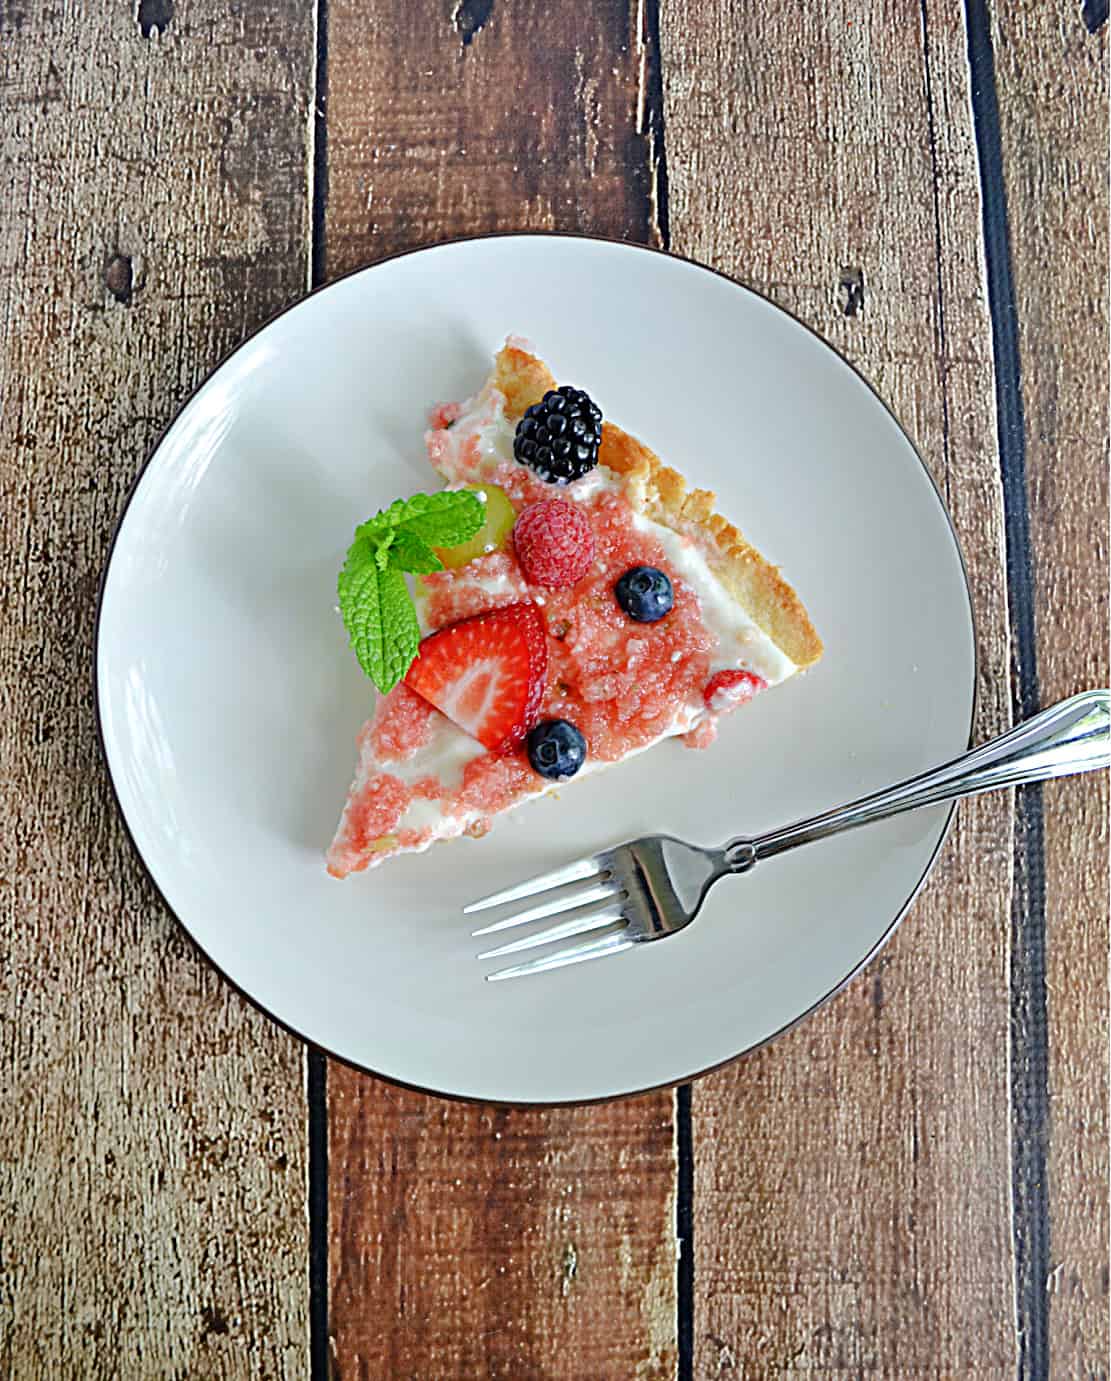 A plate with a slice of fruit pizza topped with strawberries, blueberries, and a mint left with a fork on the plate.